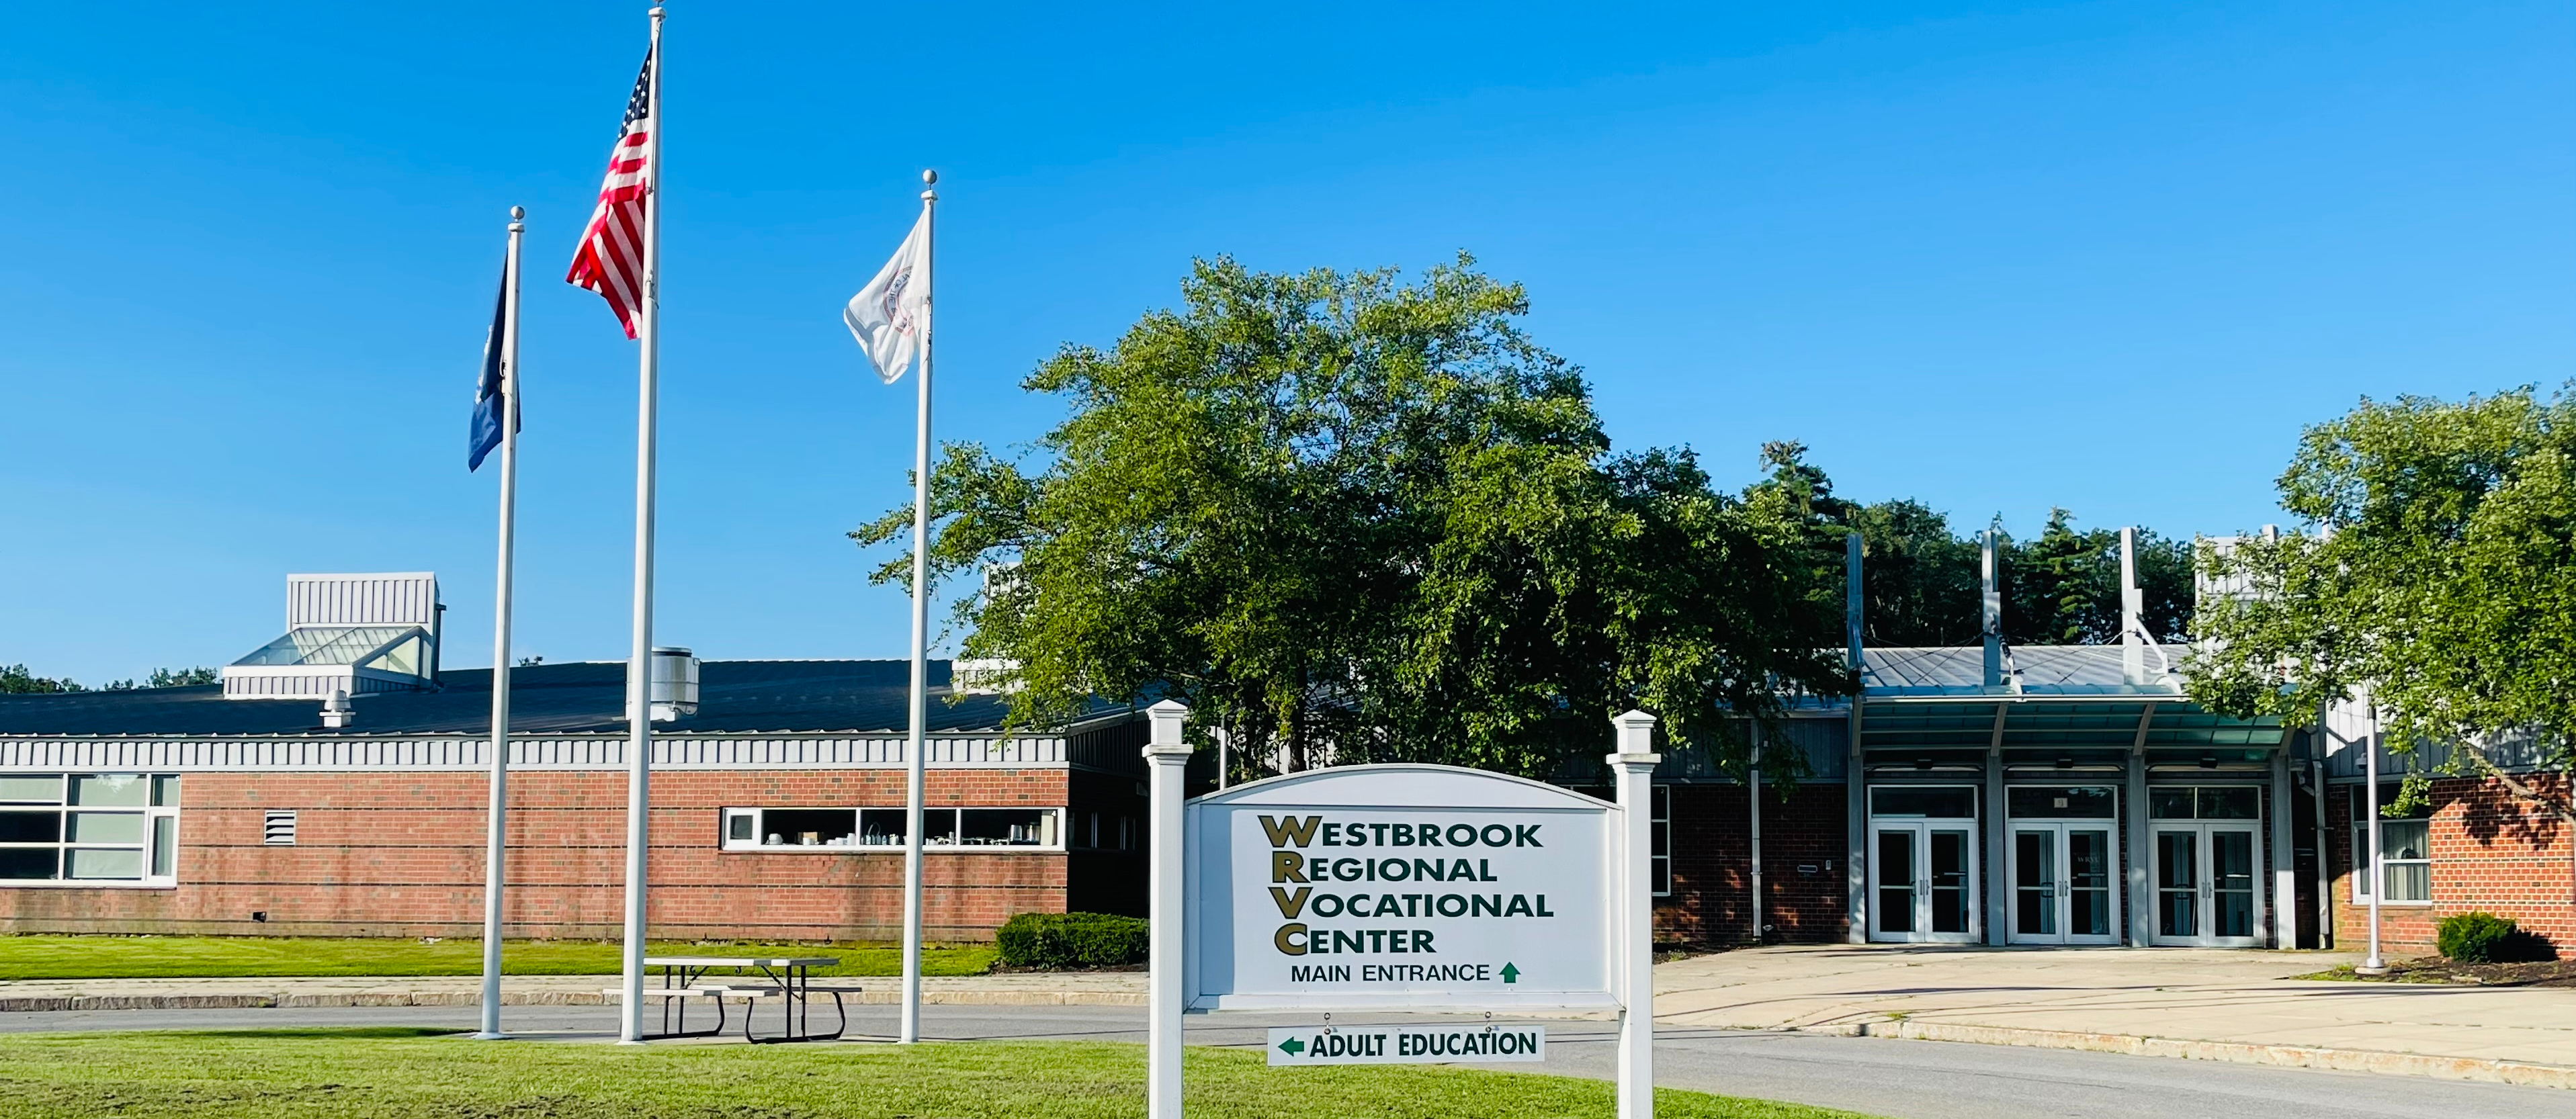 image of front of westbrook regional vocational center building bus circle area with flagpoles